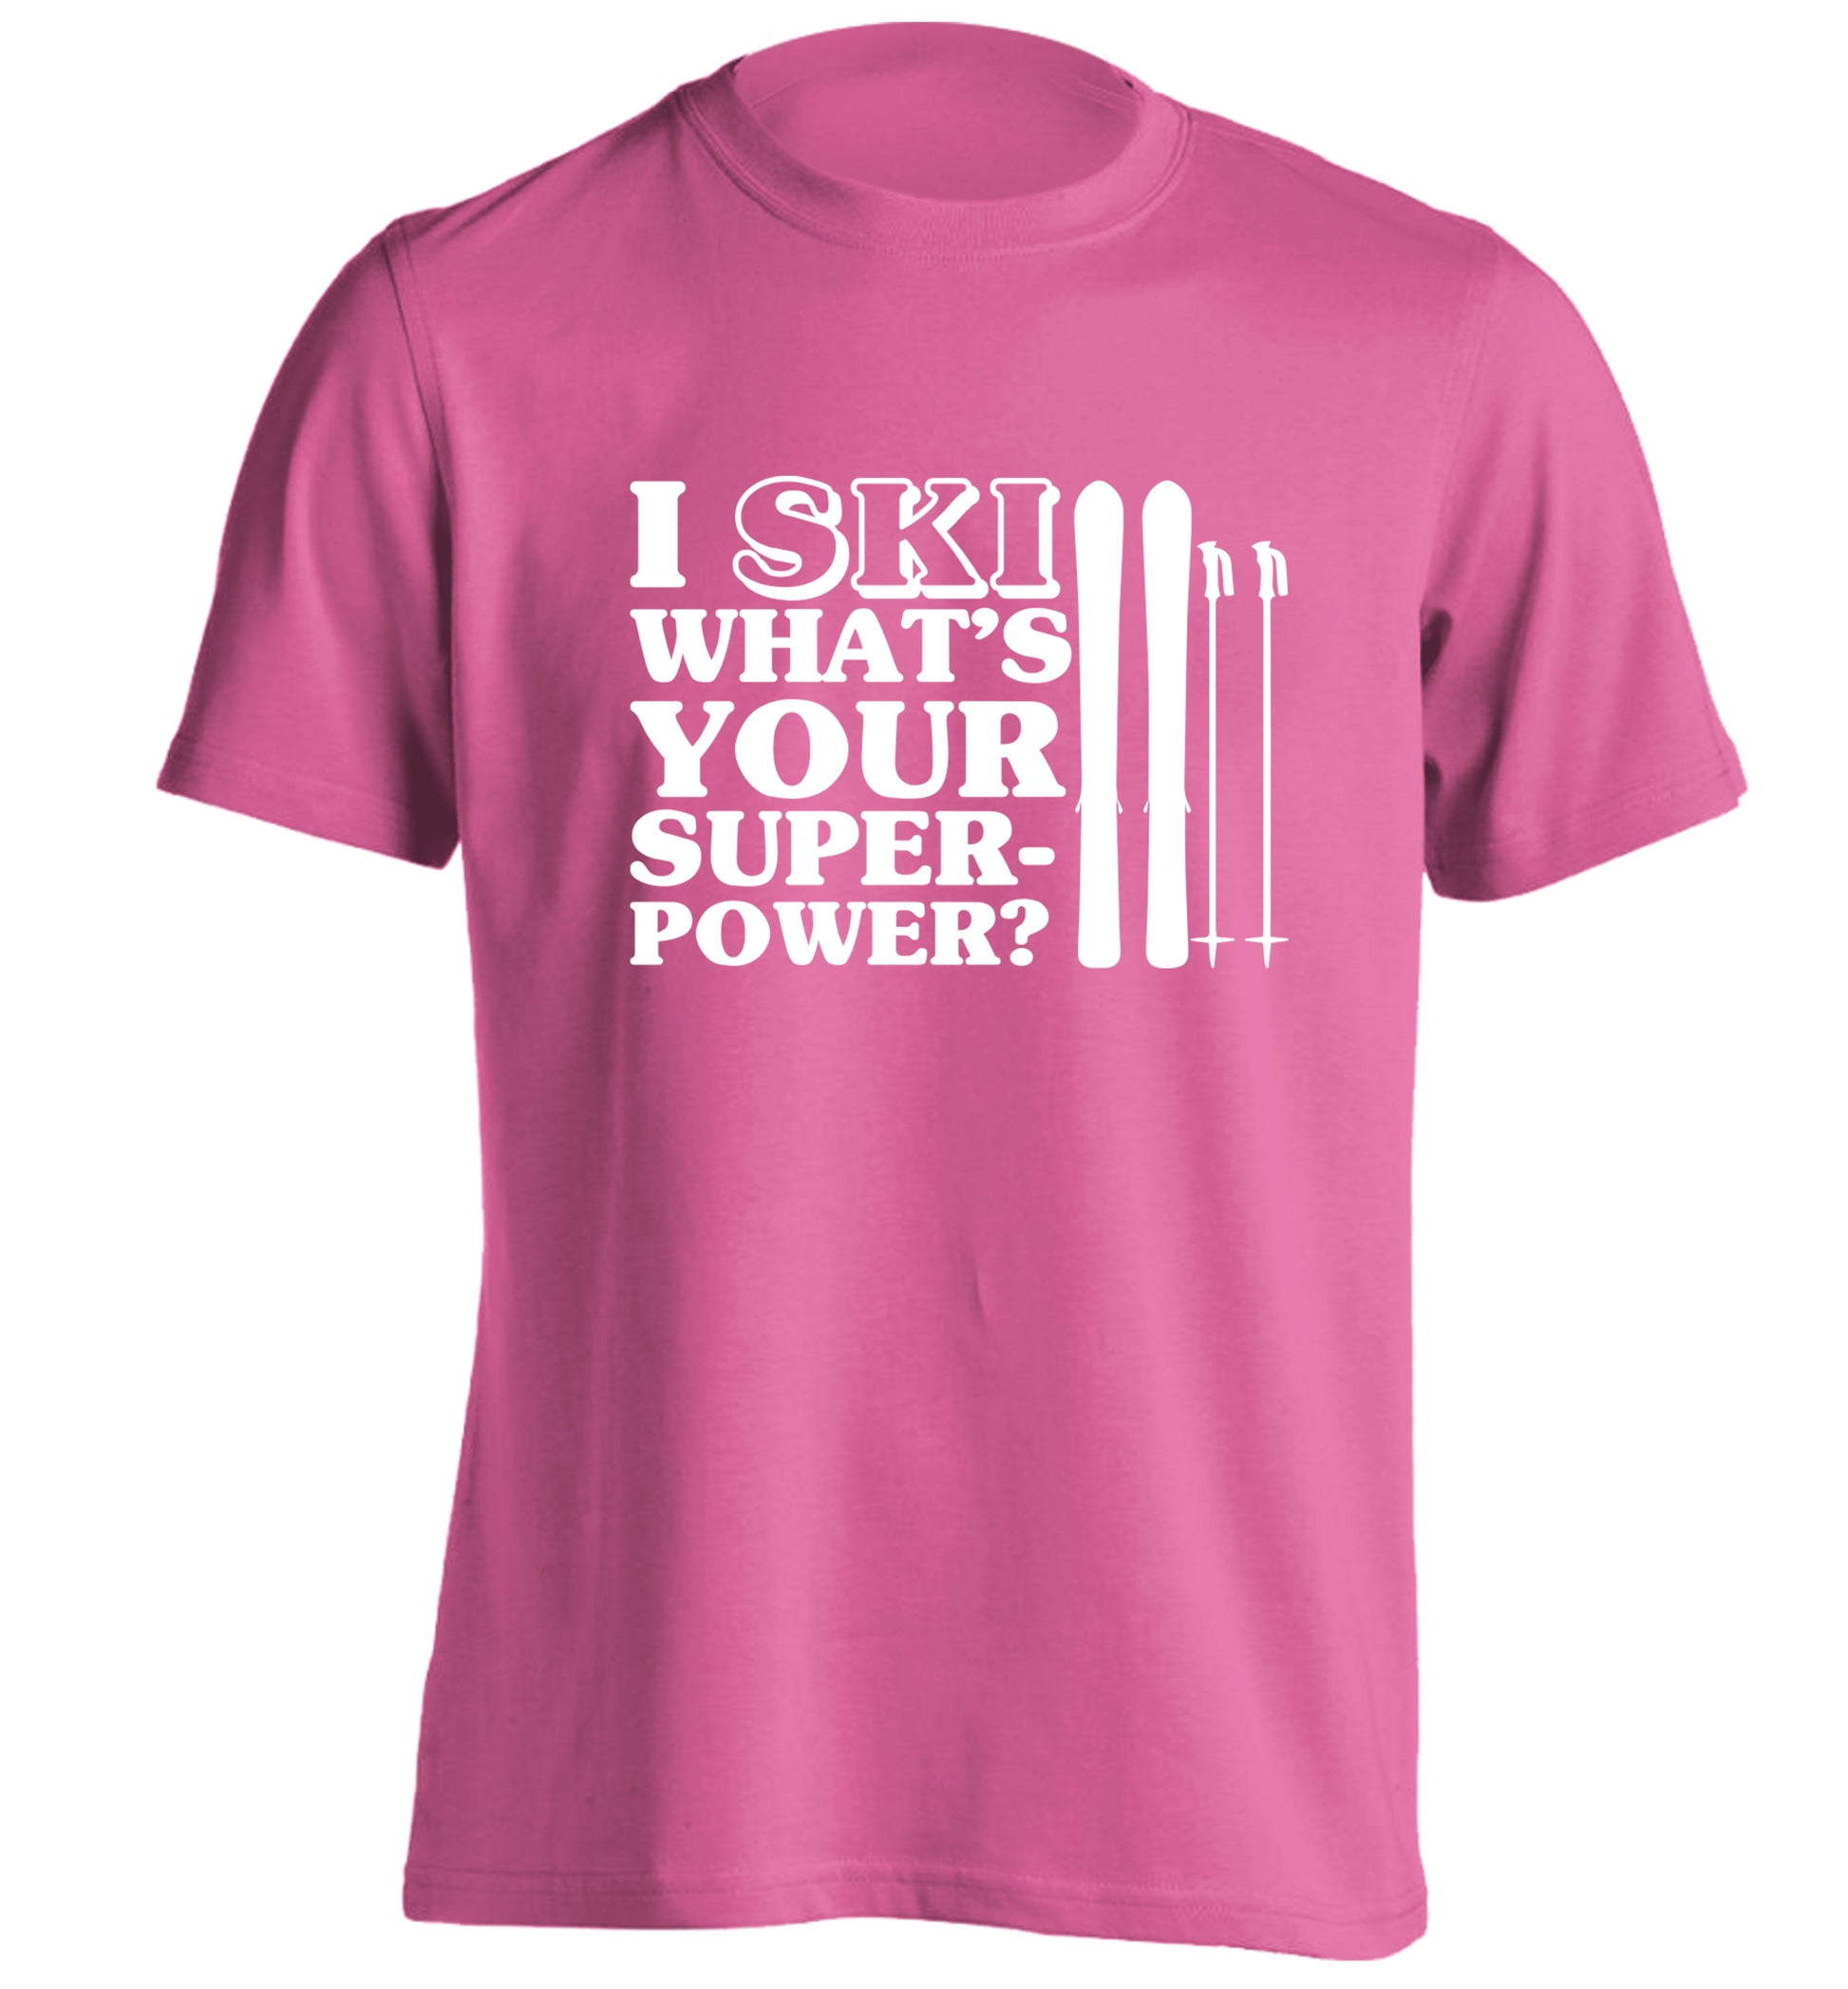 I ski what's your superpower? adults unisexpink Tshirt 2XL